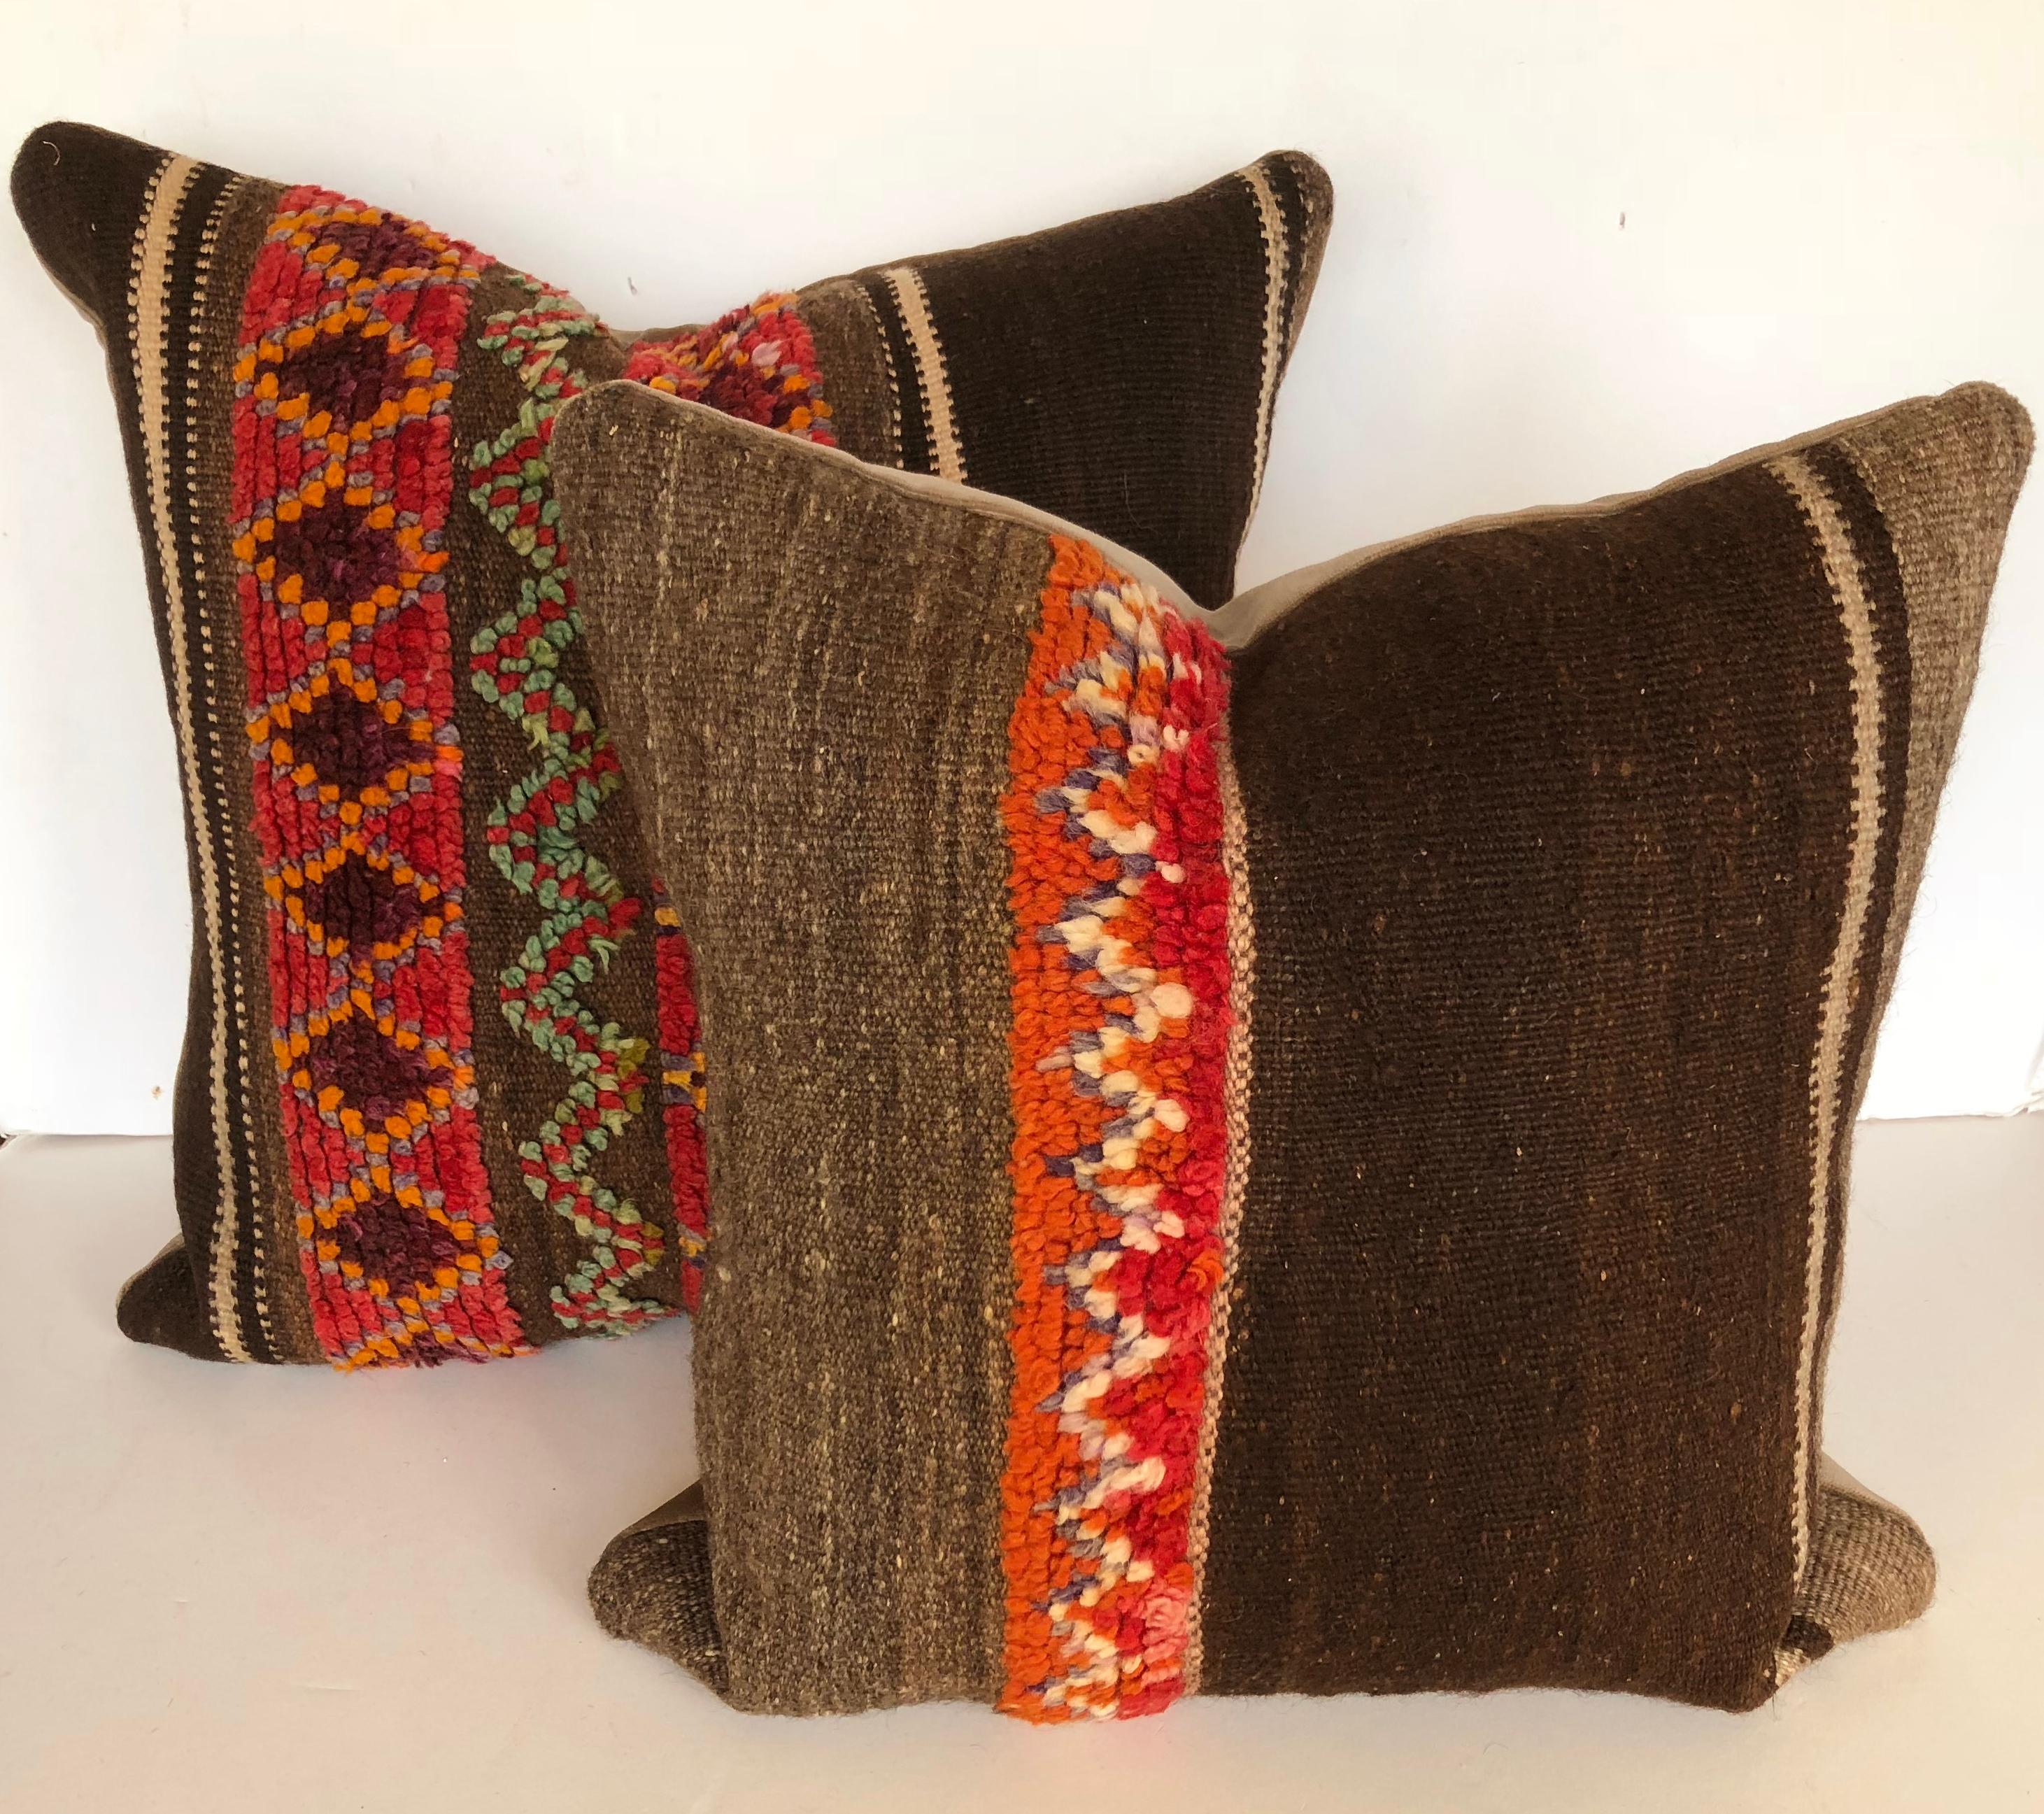 Custom Pillow by Maison Suzanne Cut from a Vintage Wool Moroccan Berber Rug In Good Condition For Sale In Glen Ellyn, IL